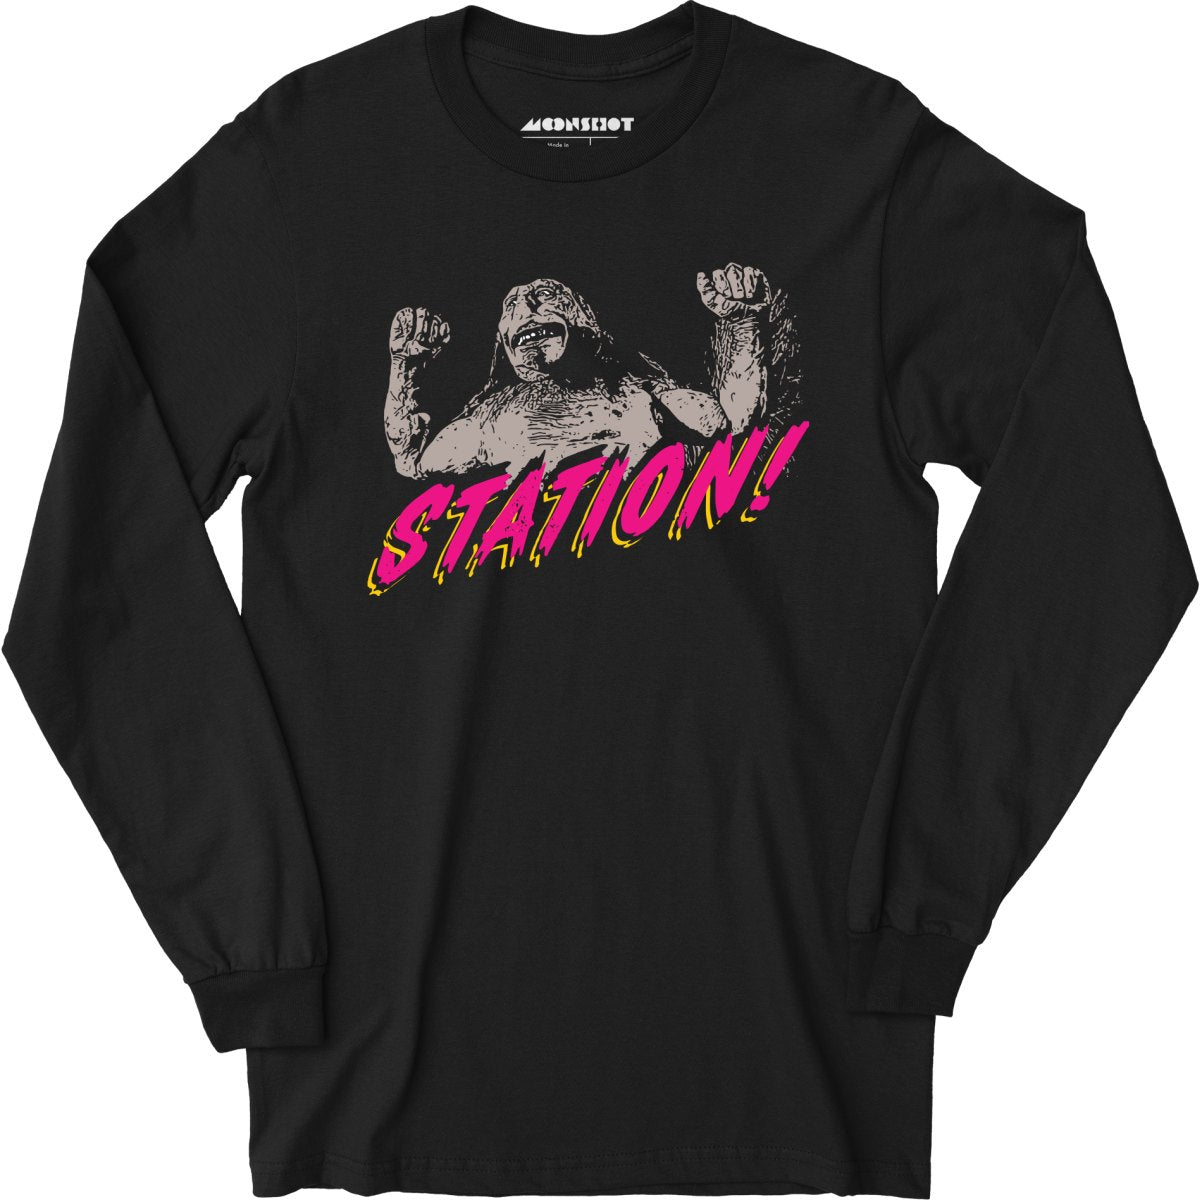 Station - Bill & Ted - Long Sleeve T-Shirt